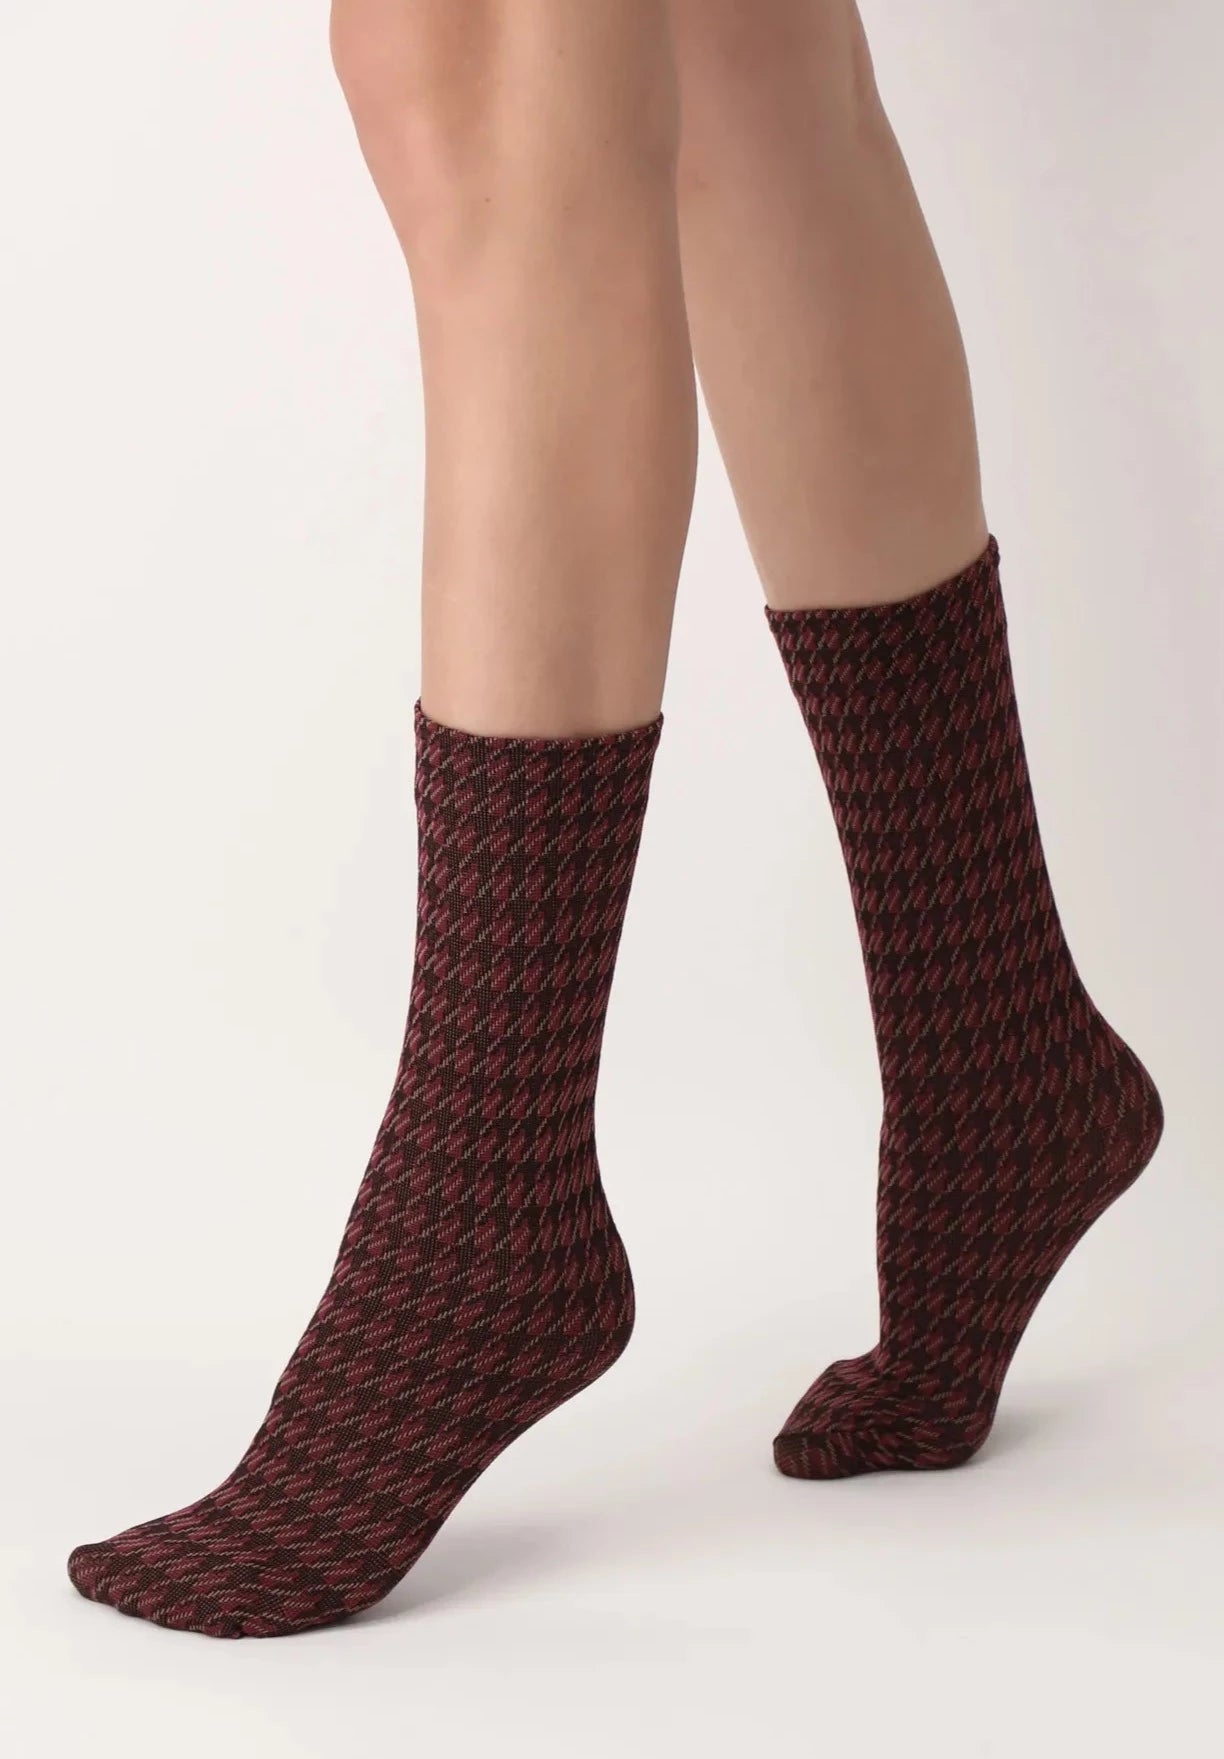 OroblÌ_ Pied De Poule Texture Sock - Soft opaque fashion ankle socks with a black and wine houndstooth textured pattern with a fleck of beige.